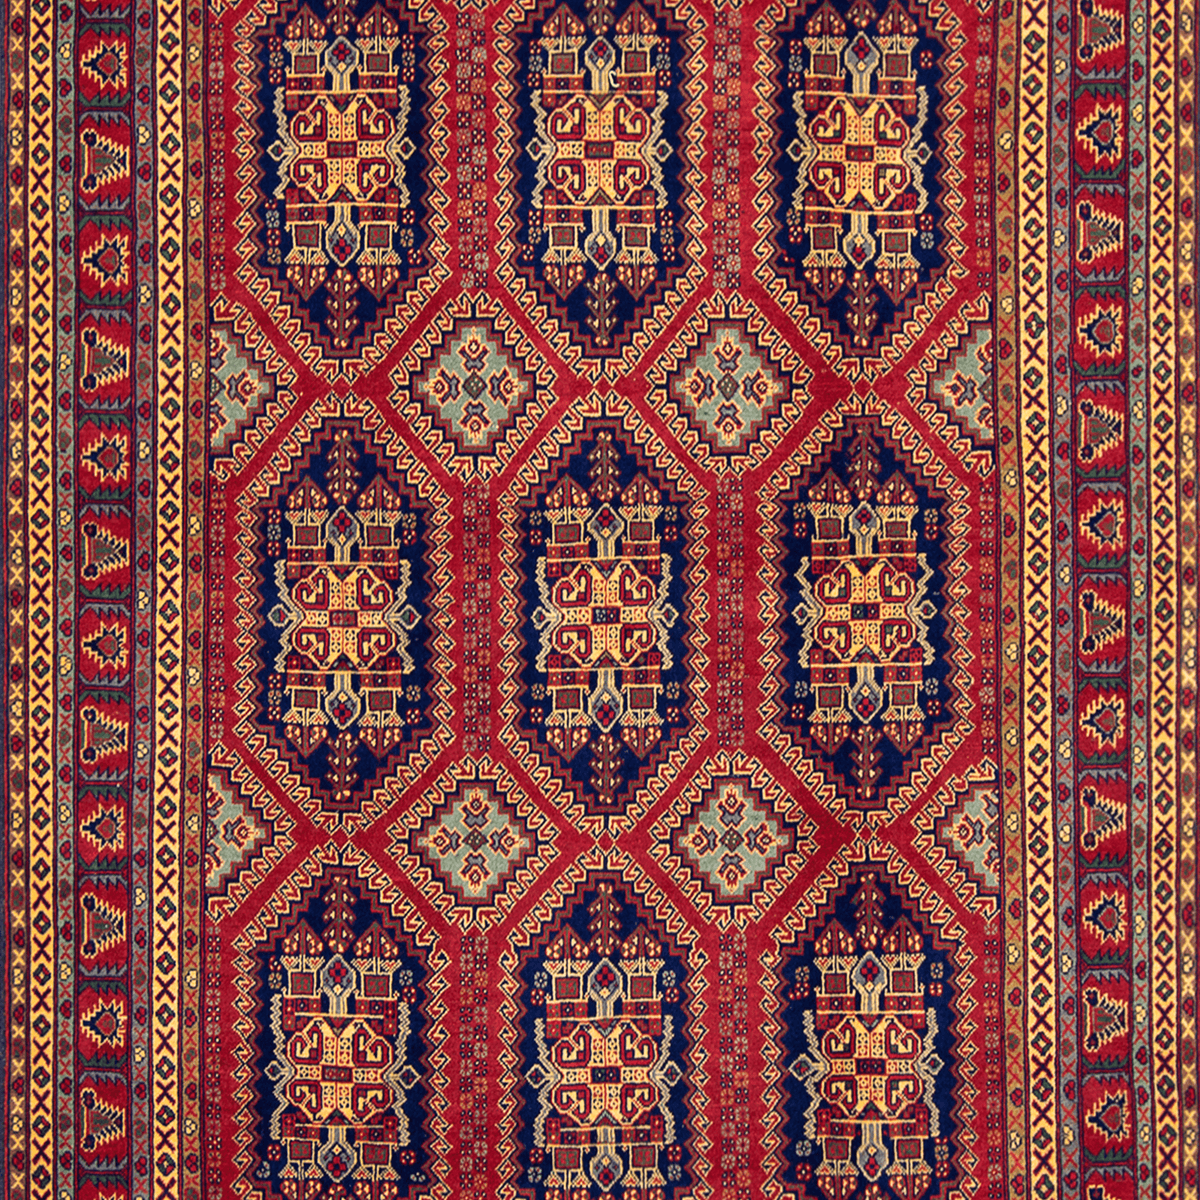 Super Fine Hand-knotted Tribal Wool Rug 195cm x 297cm